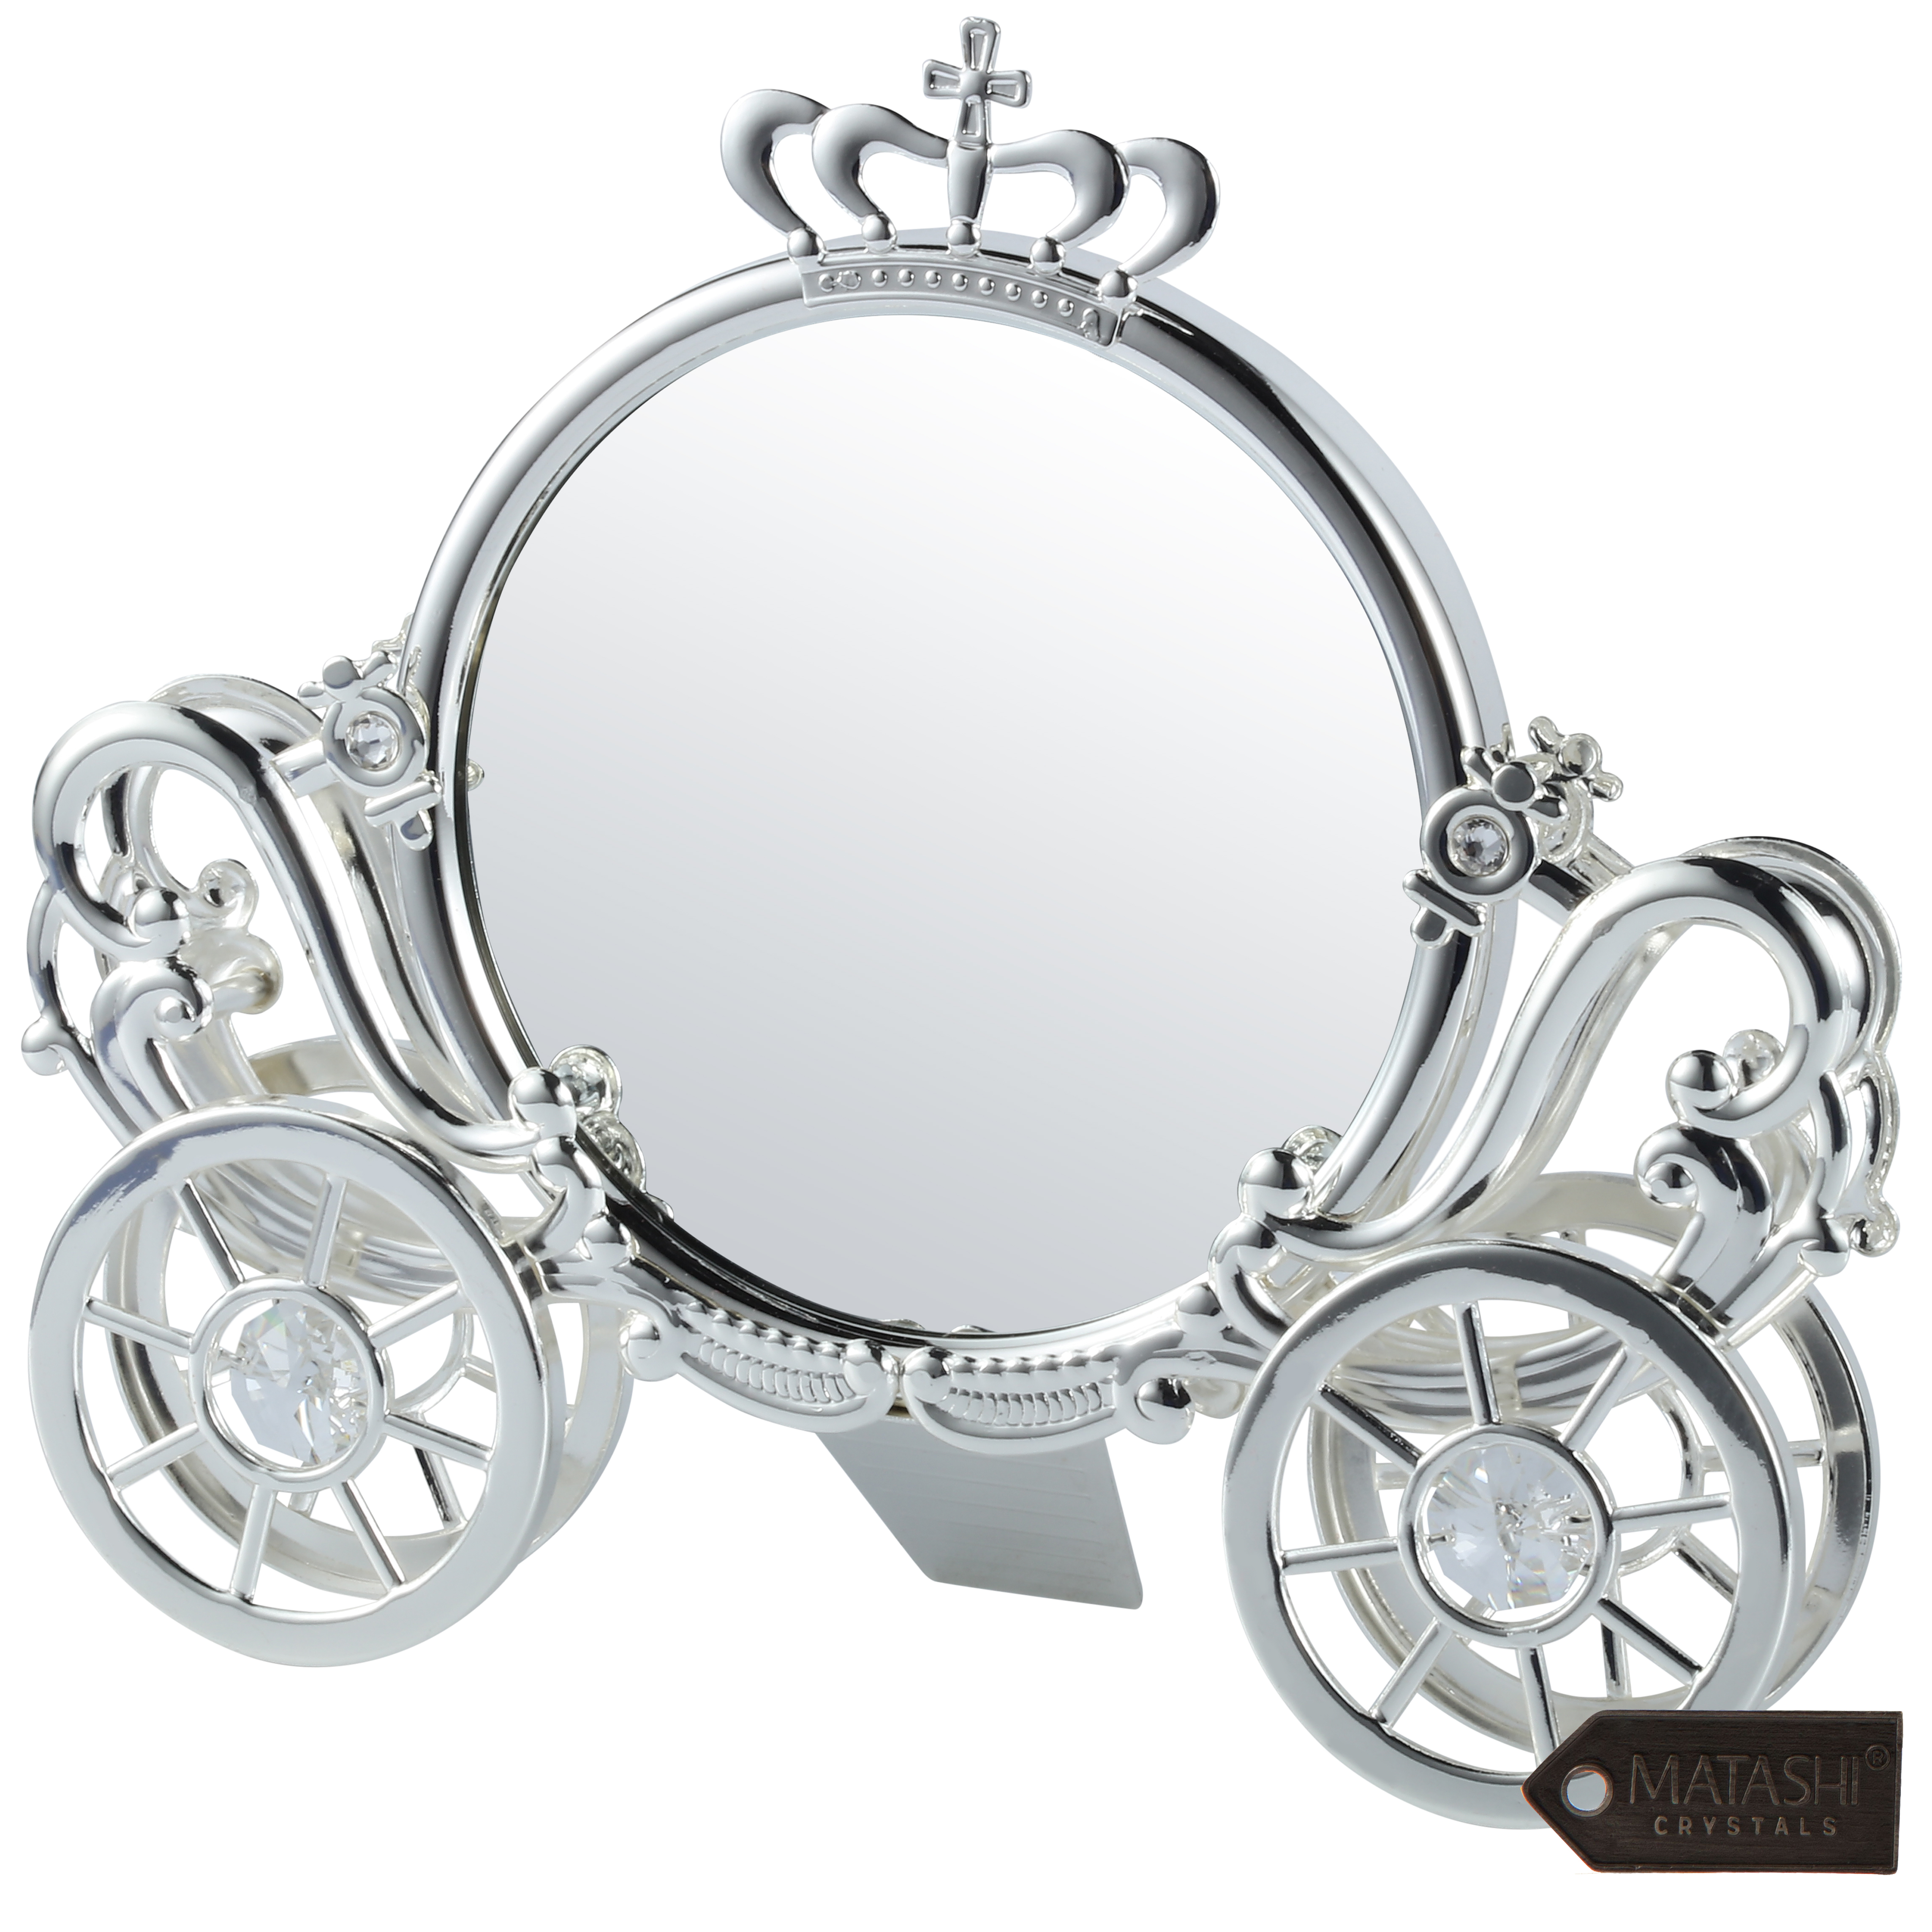 Silver Plated Double Sided Cinderella Princess Coach Mirror Embellished With Crystals By Matashi